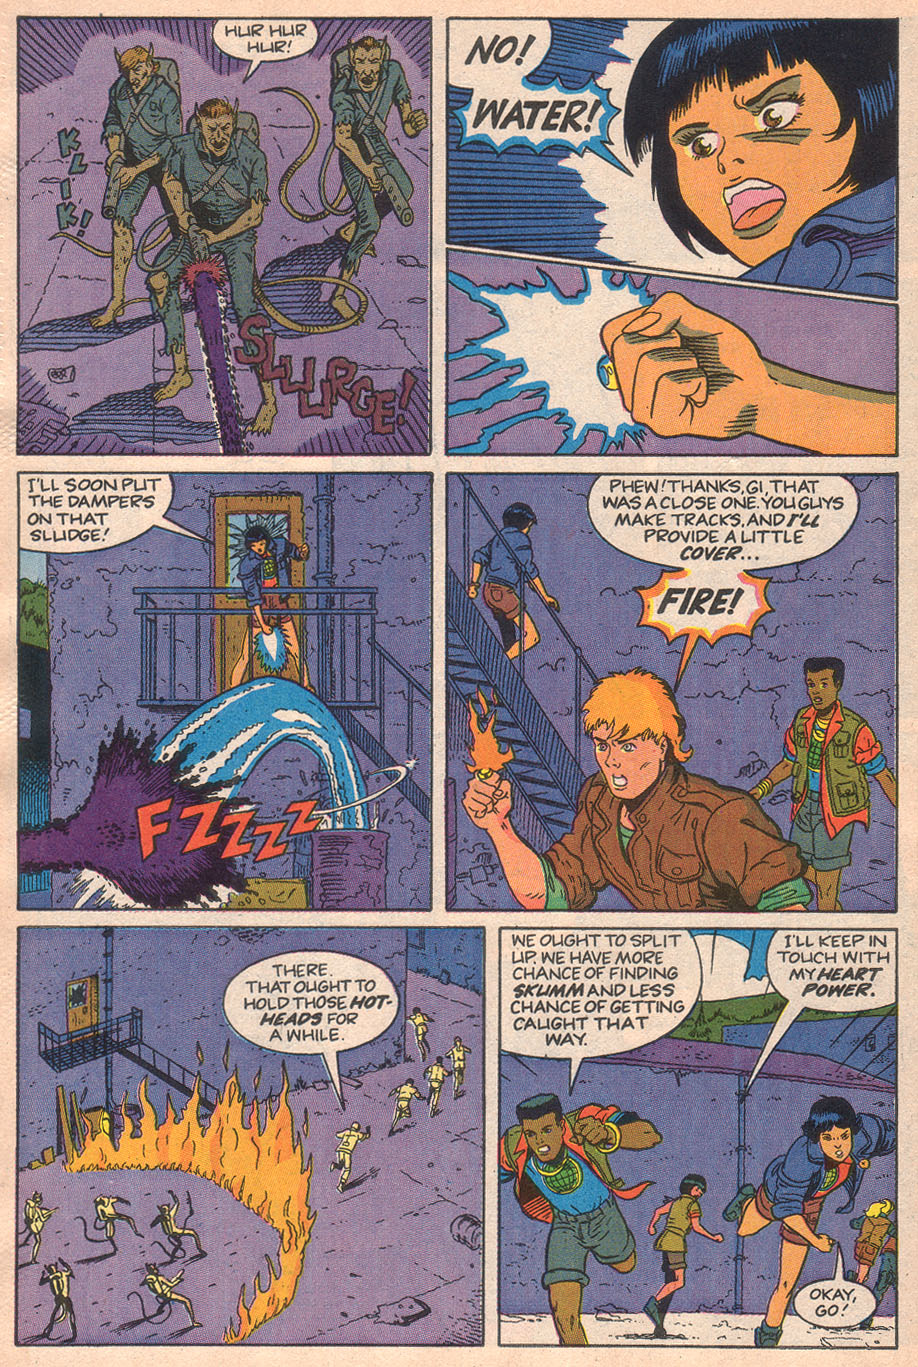 Captain Planet and the Planeteers 6 Page 21